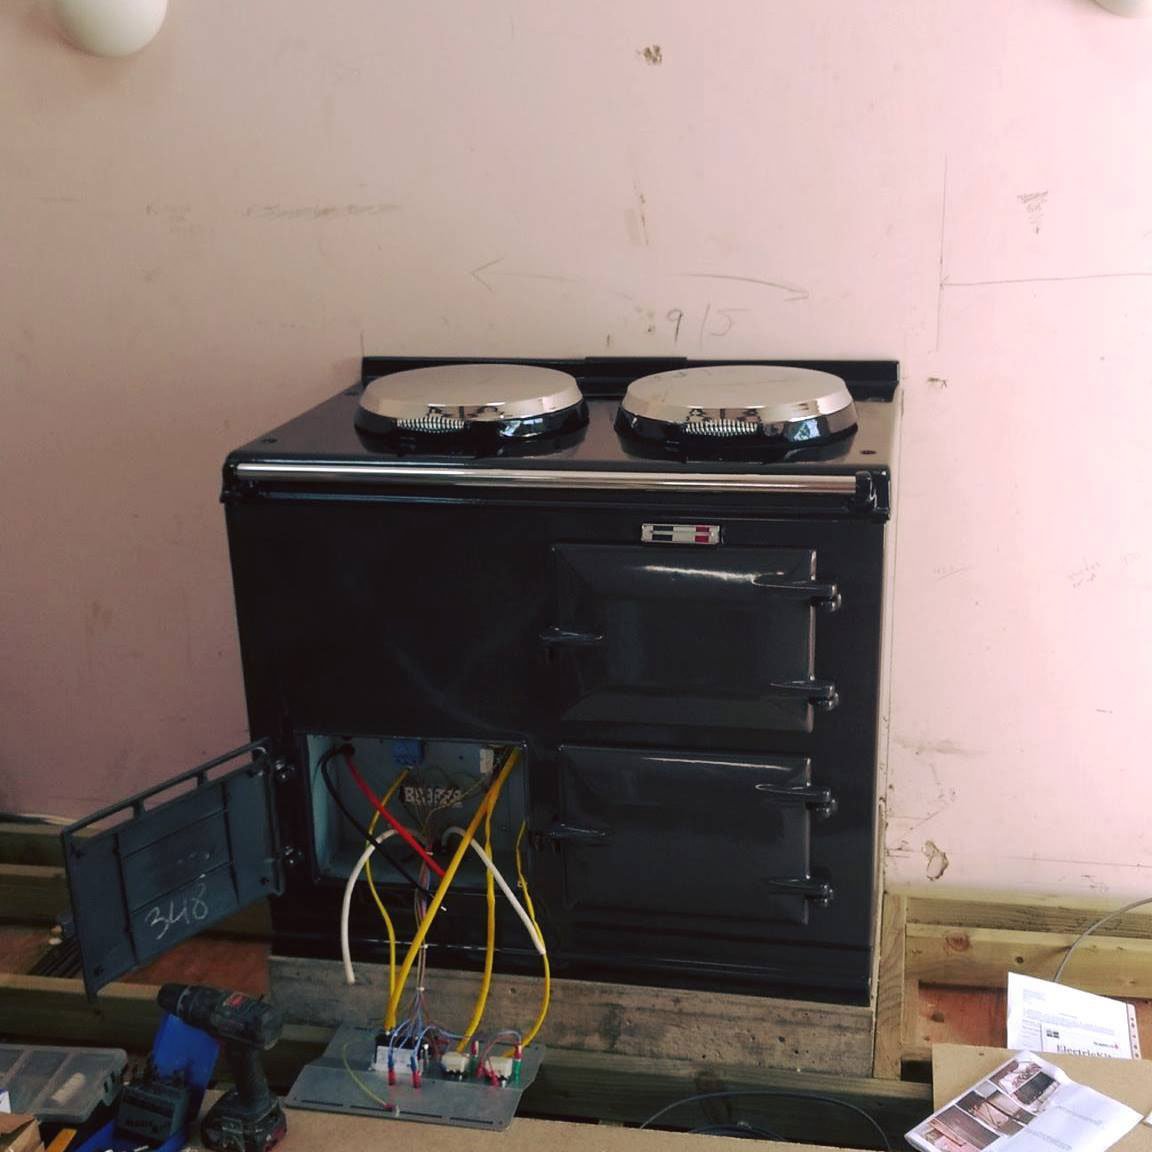 Aga range cooker in process of conversion